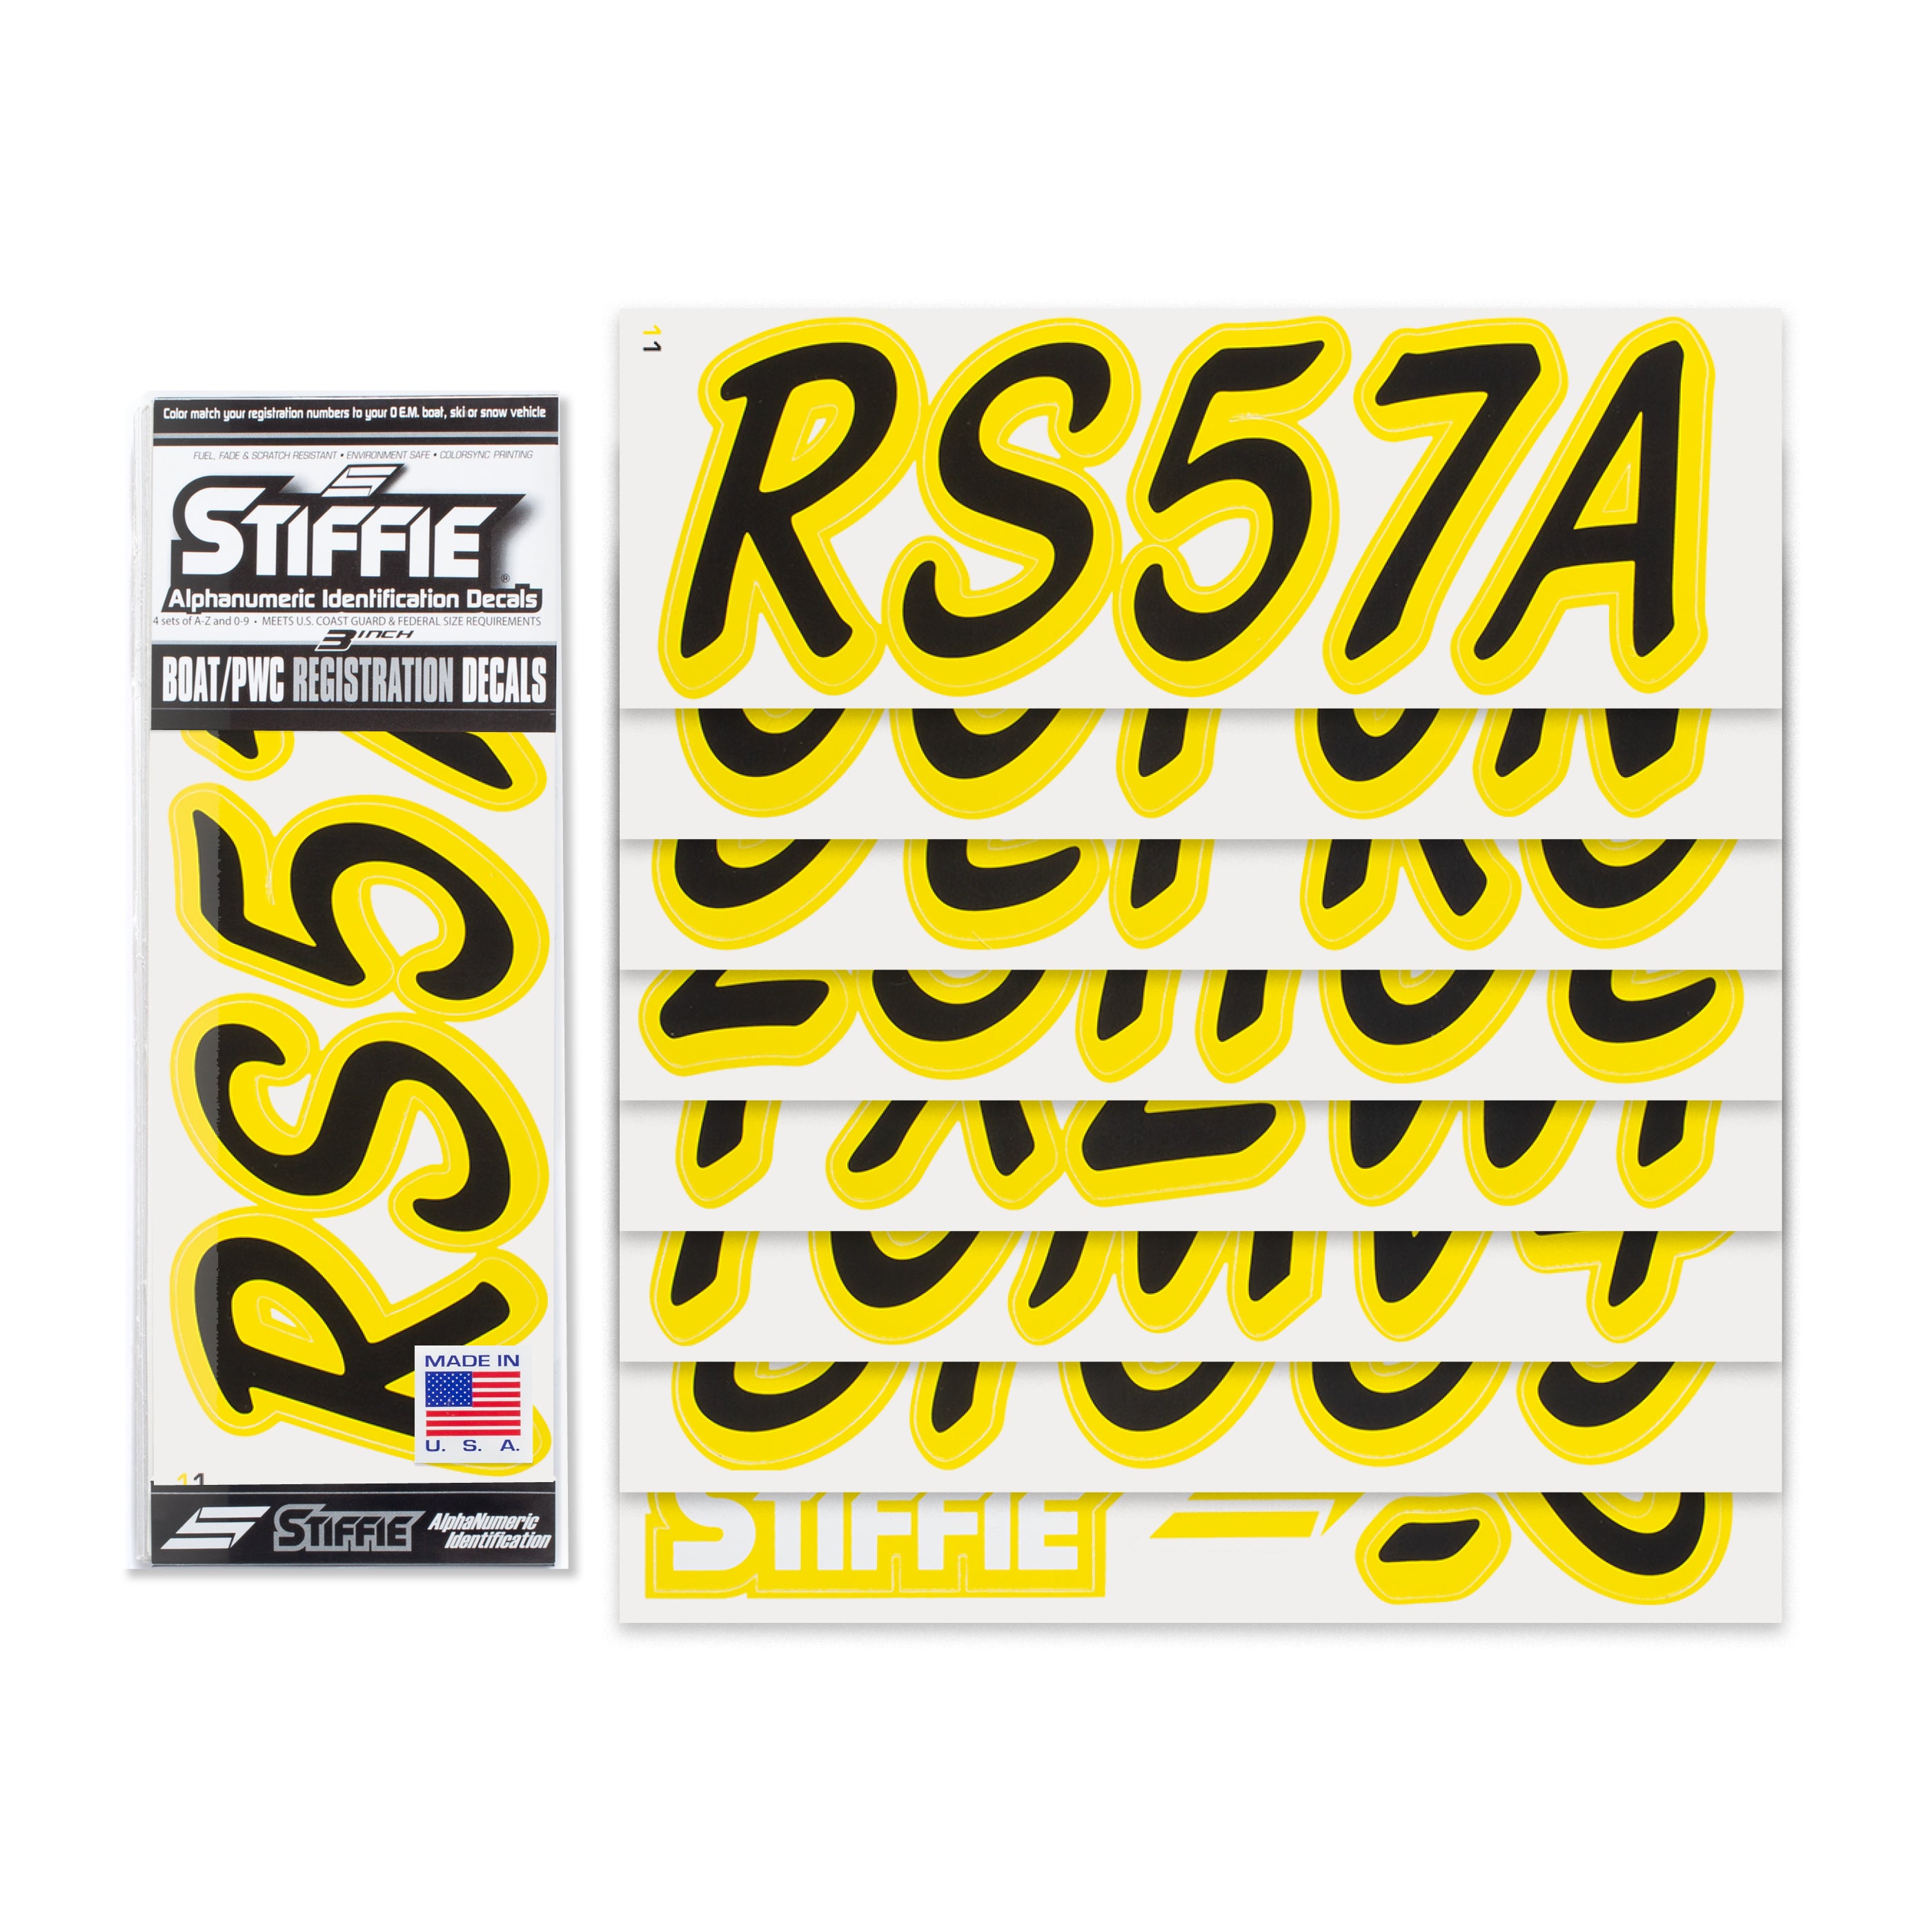 STIFFIE Whipline Solid Black/Electric Yellow 3" Alpha-Numeric Registration Identification Numbers Stickers Decals for Boats & Personal Watercraft